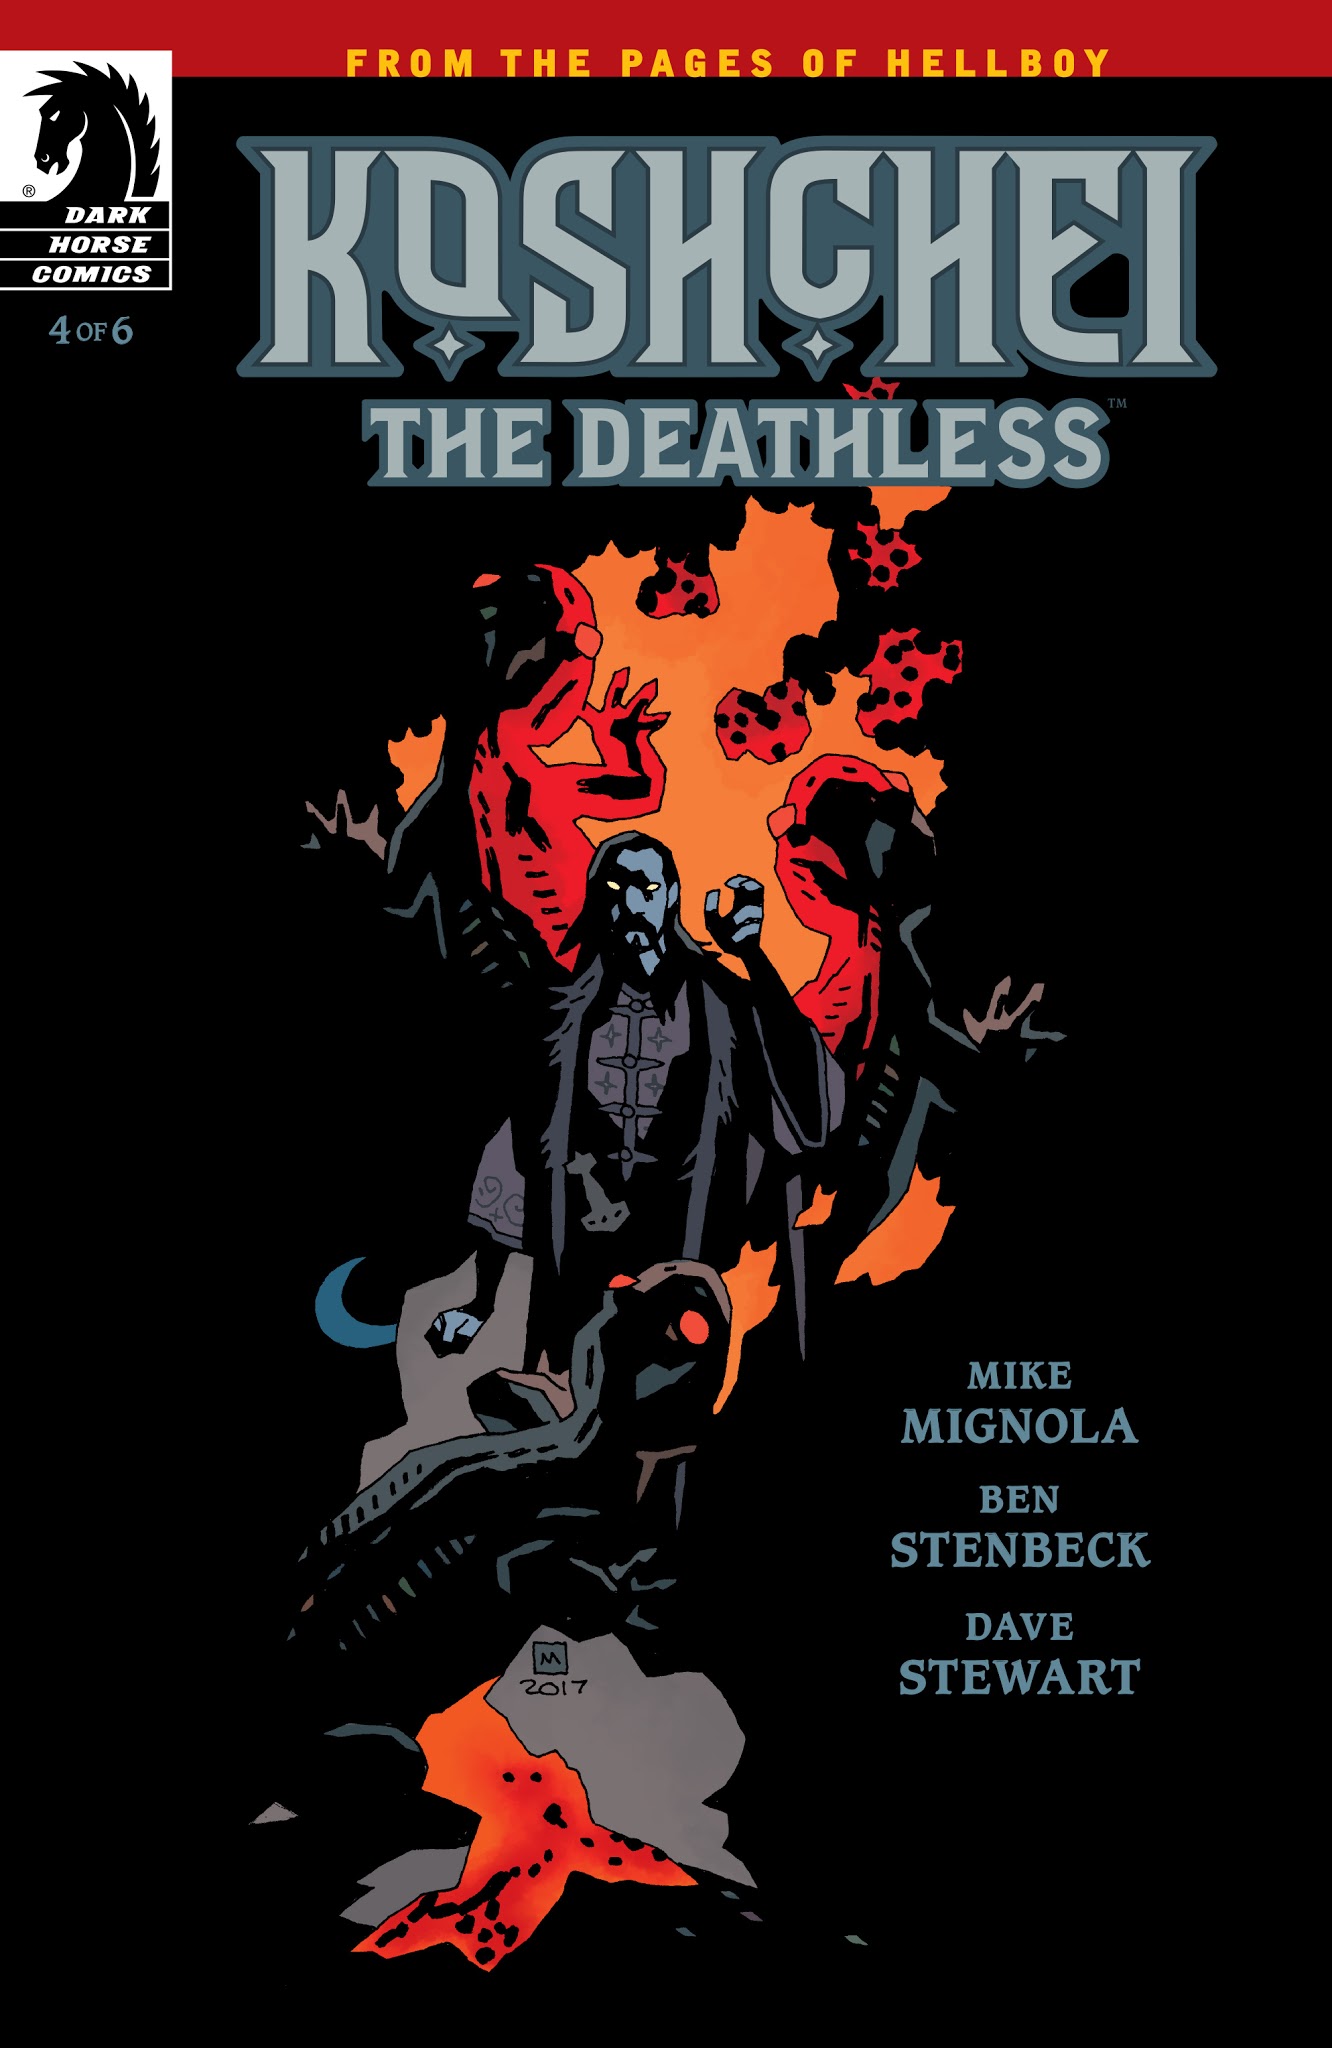 Read online Koshchei the Deathless comic -  Issue #4 - 1